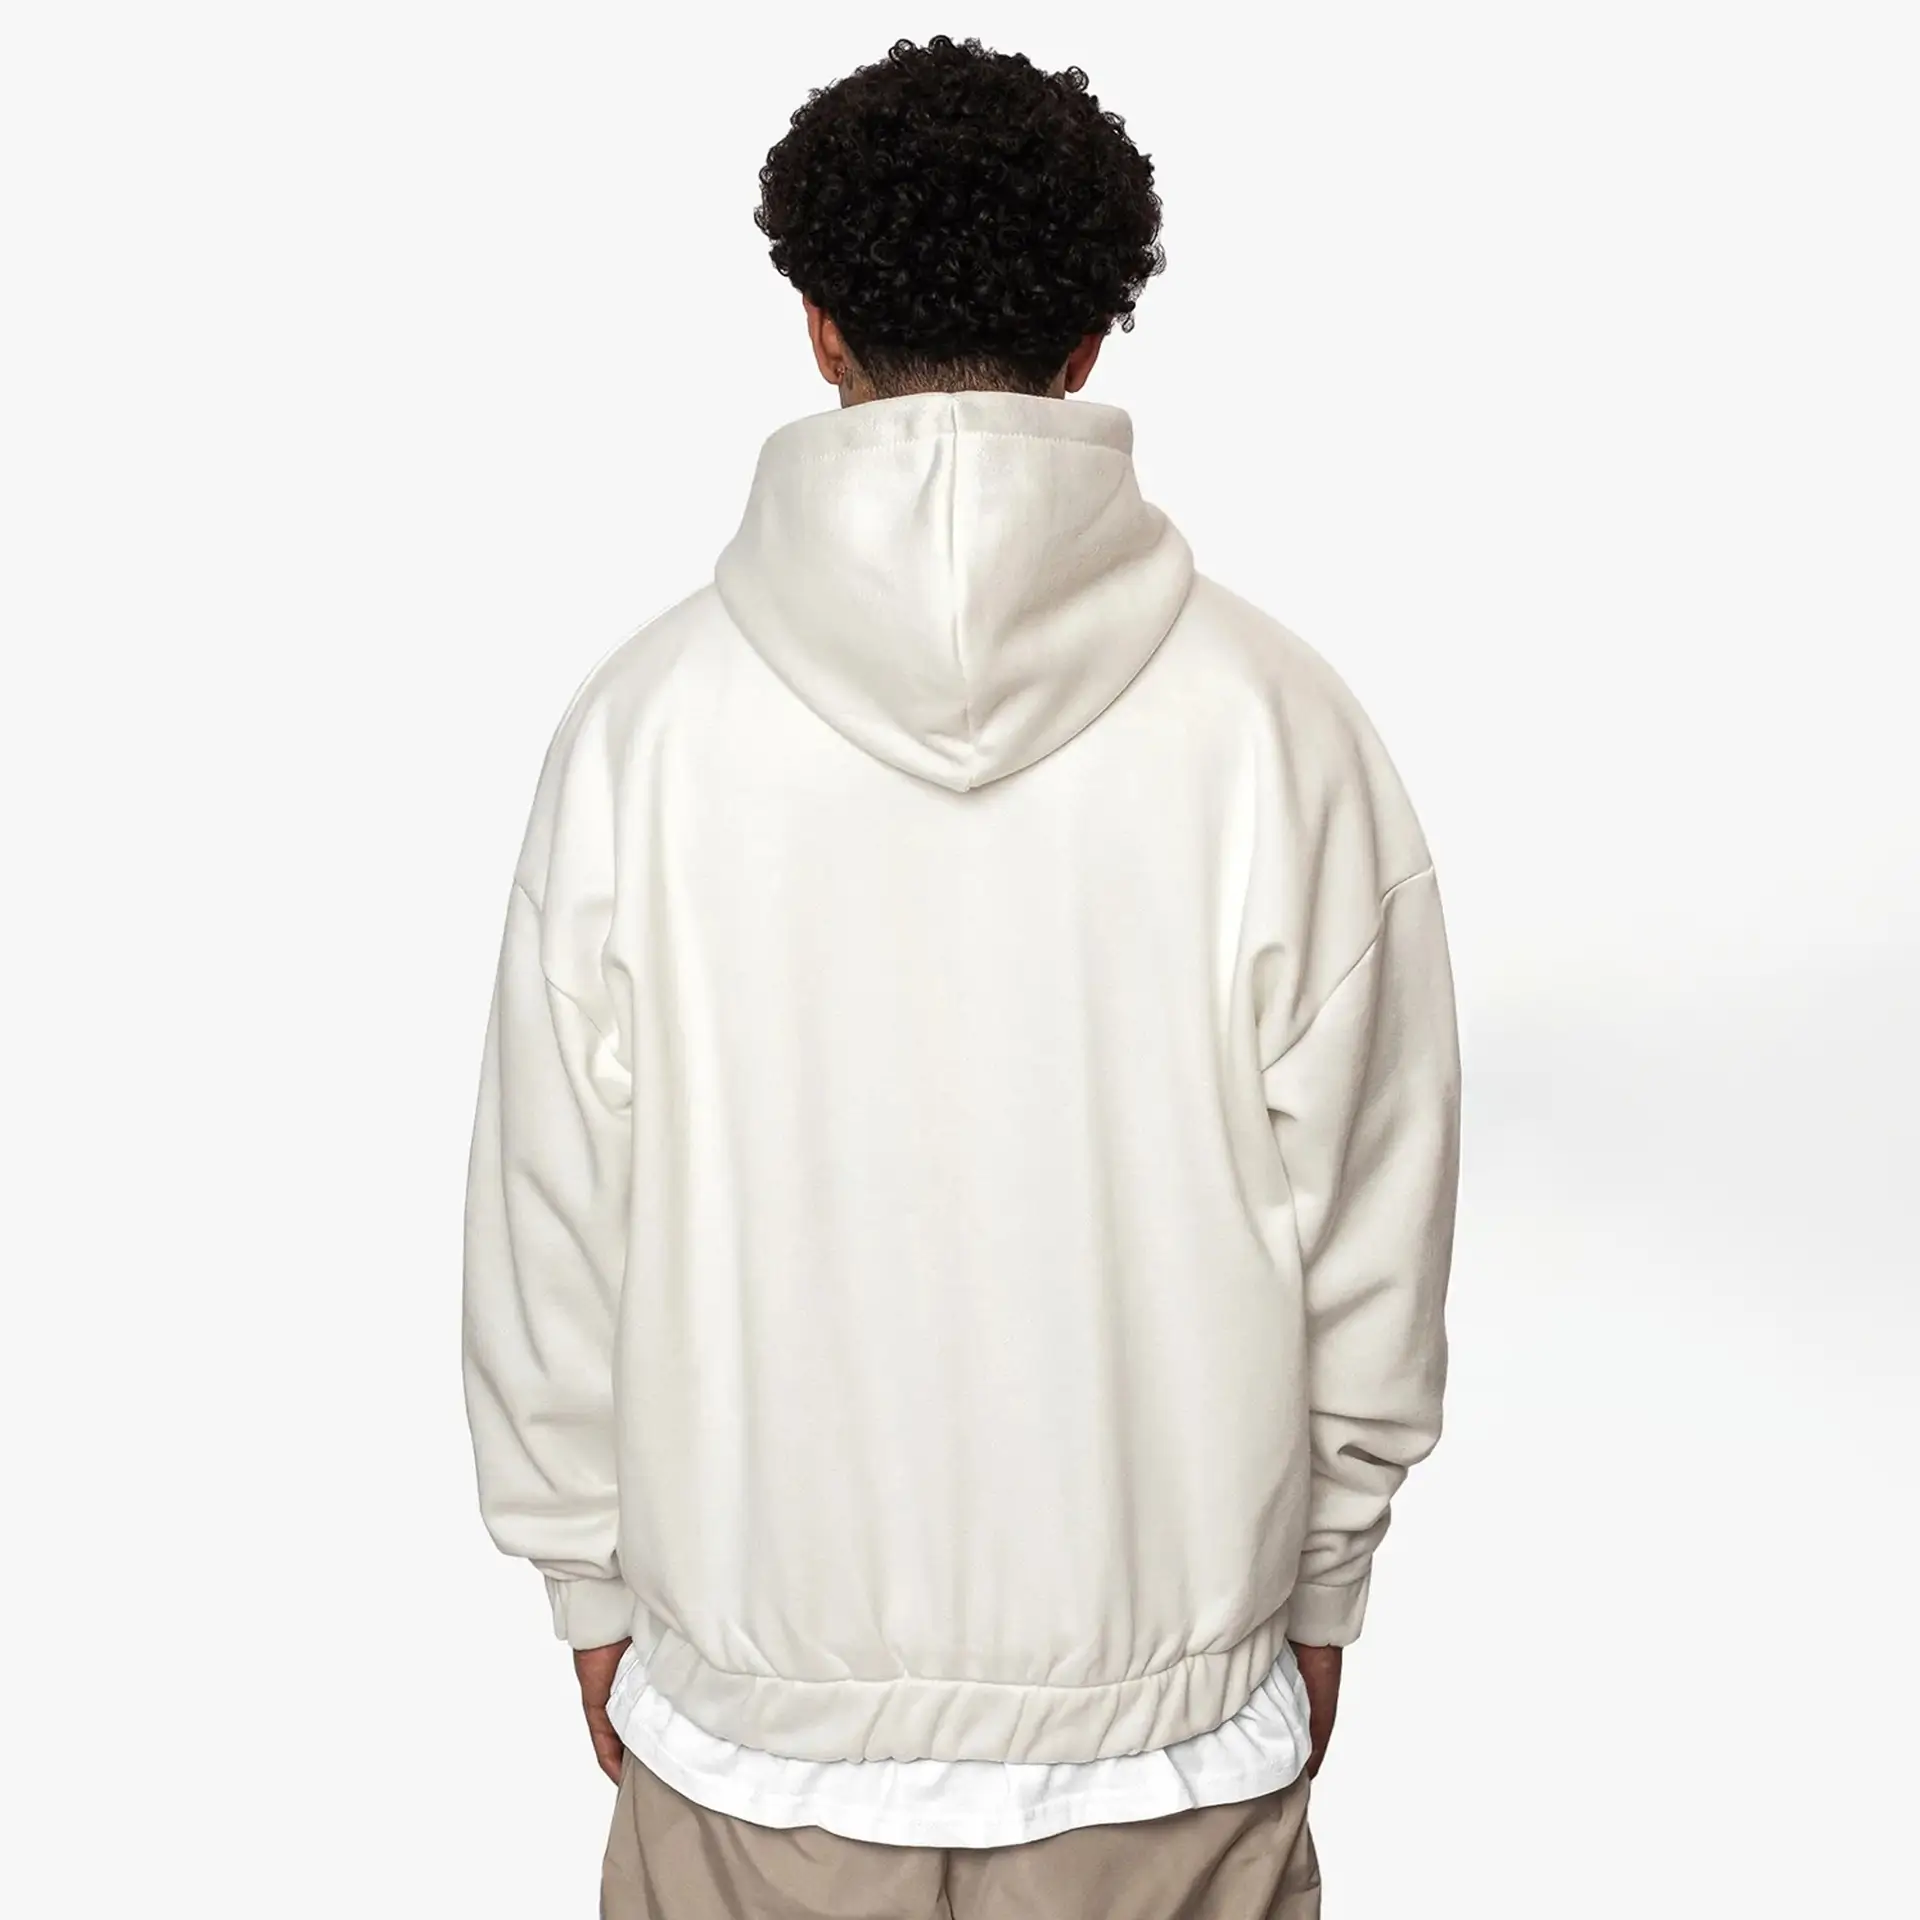 Dropsize Super Heavy Oversize Blank Zip Hoodie Washed White